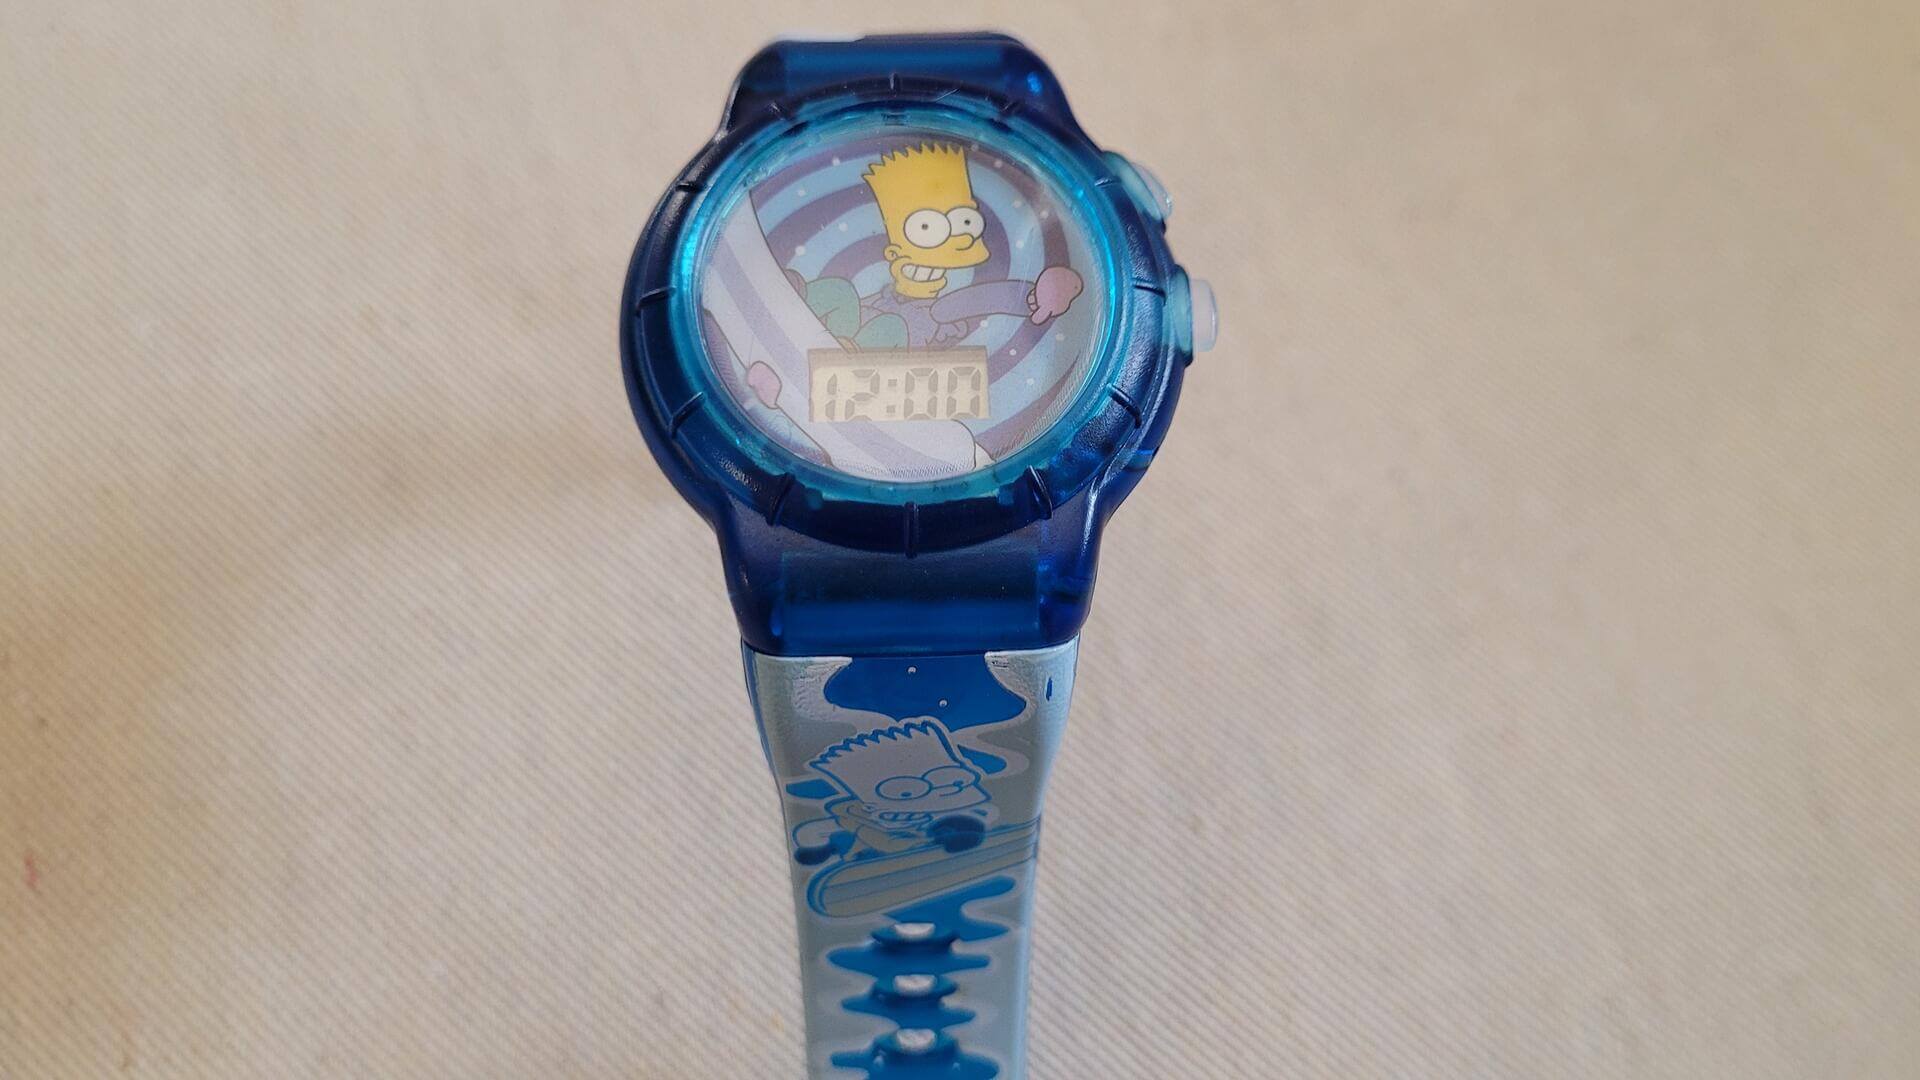 2002 Bart Simpsons "Cool Your Jets Man" talking watch. Awesome vintage Simpsons and Burger King nostalgia collectible, working with the brand new battery, one of four different Simpsons talking watches released as promotional kids meal swag.